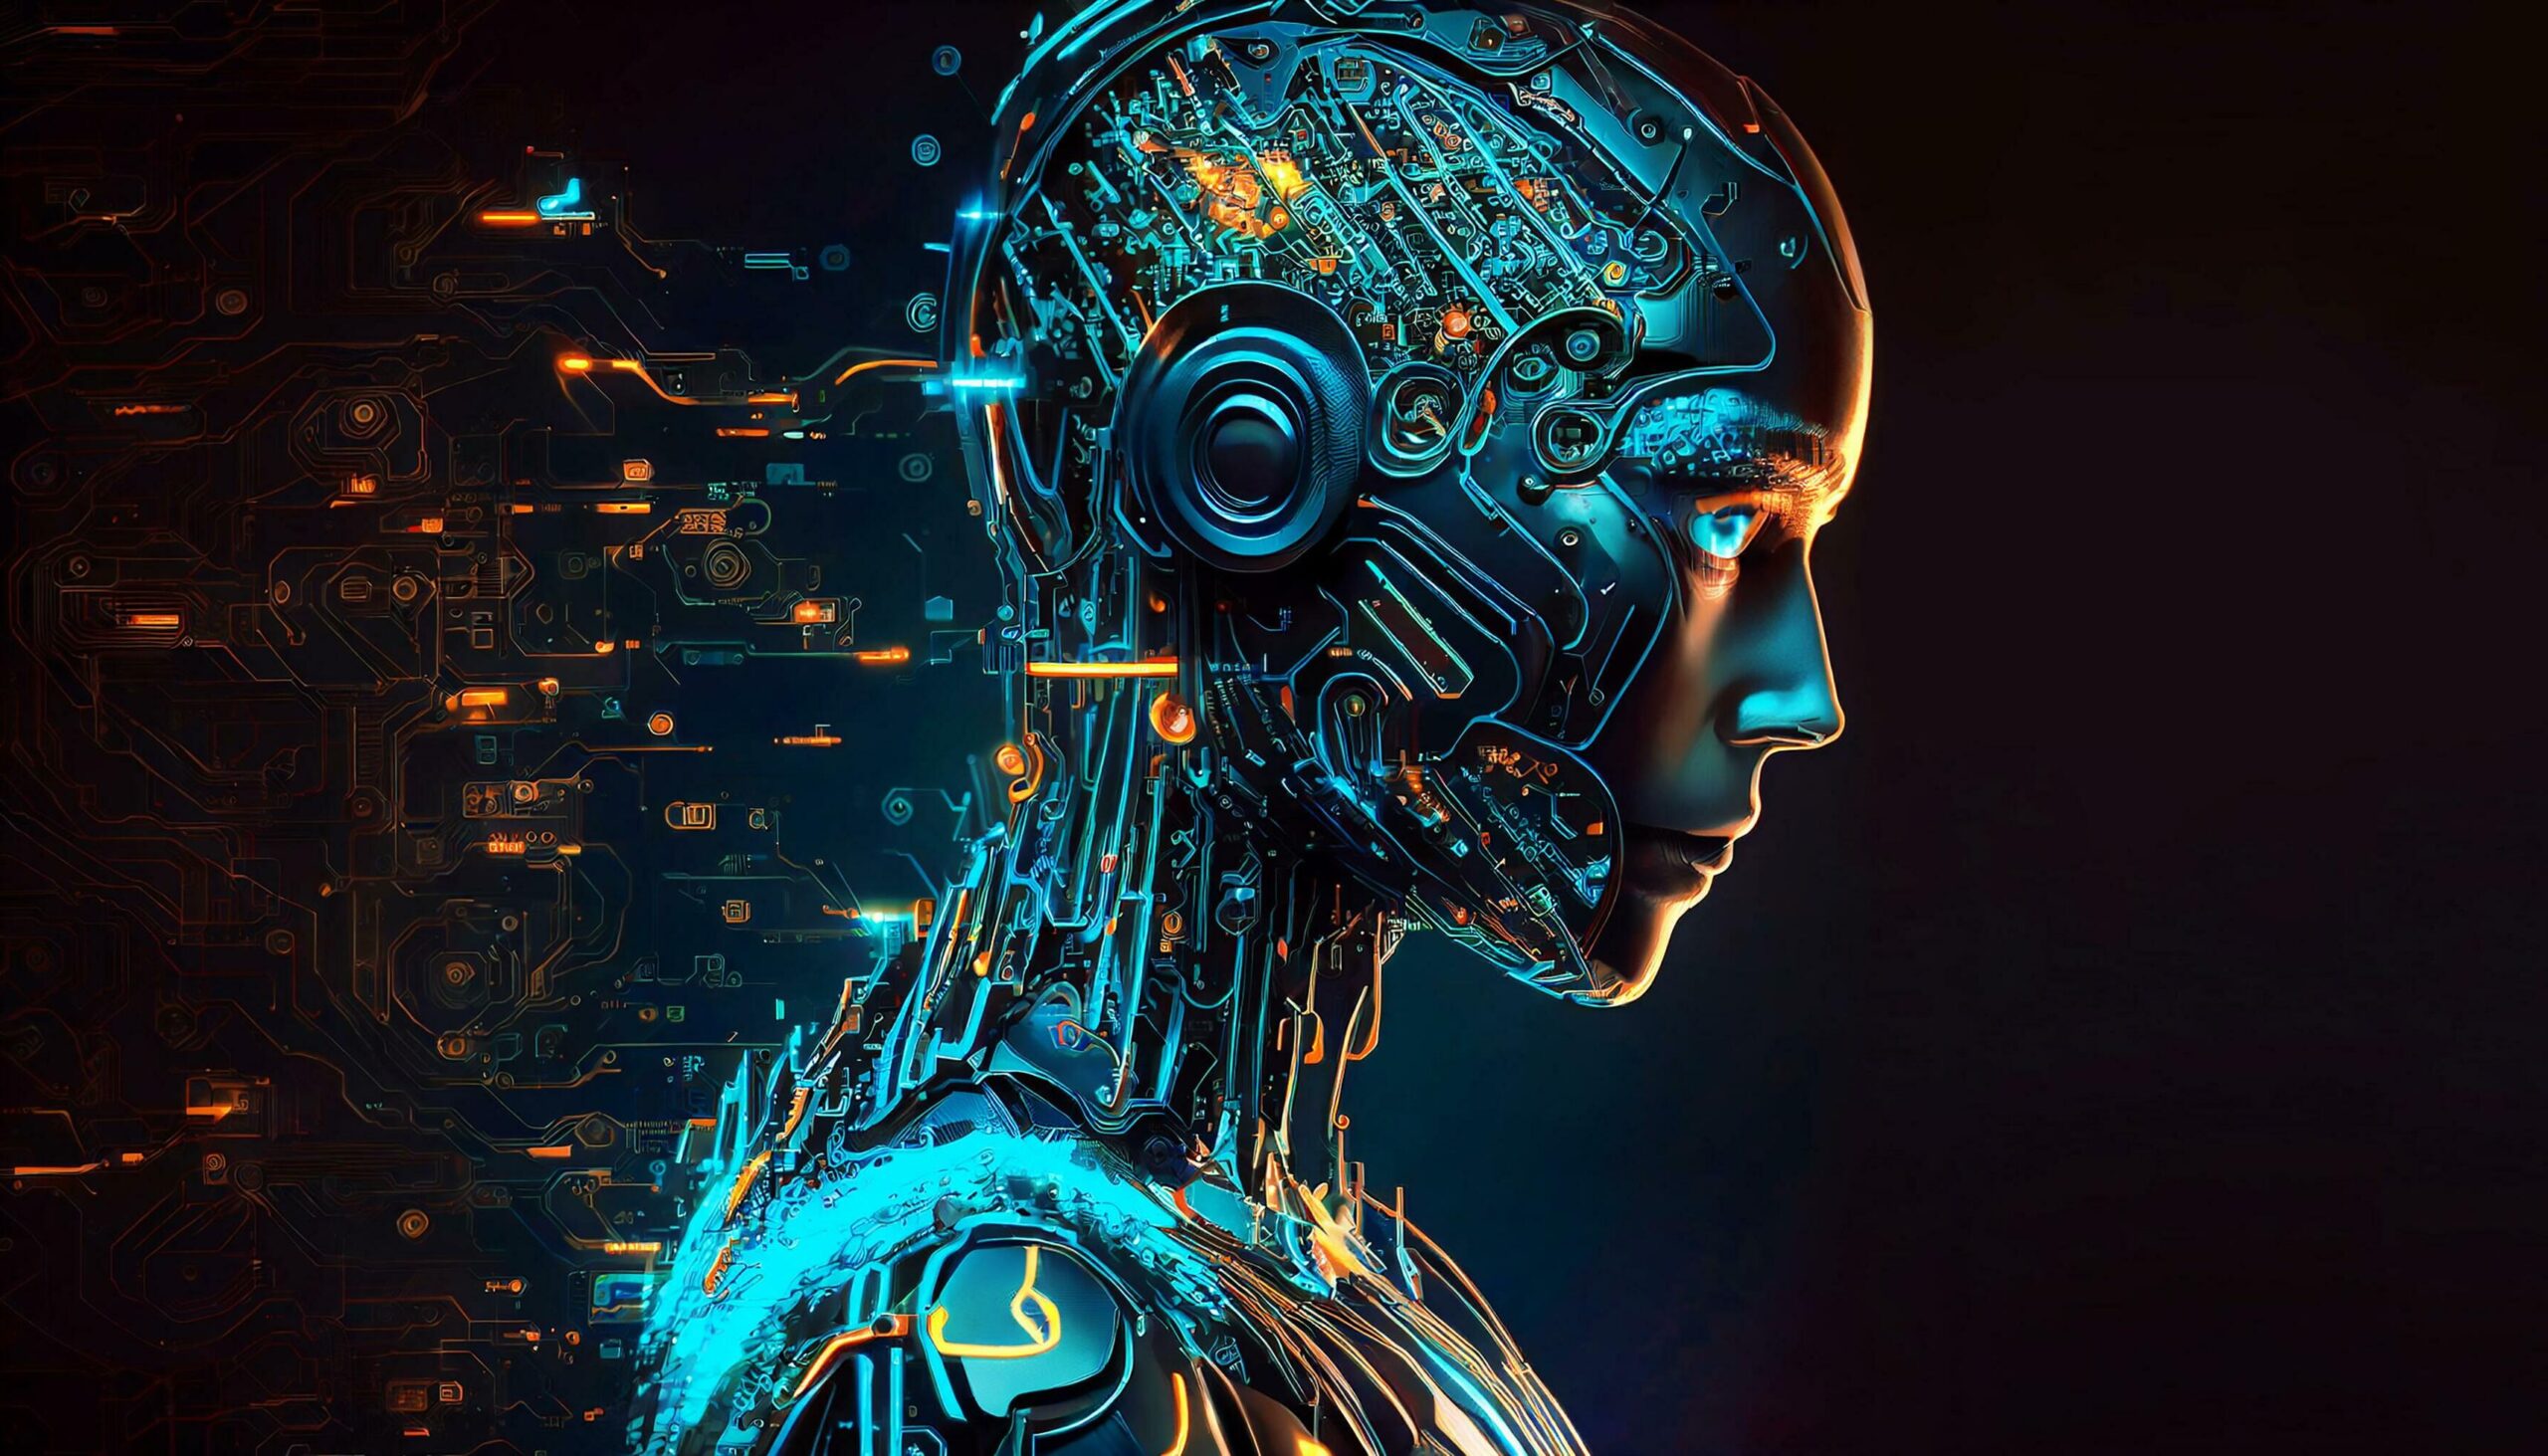 ai-artificial-intelligence-humanoid-side-portrait-view-with-blue-and-orange-vibrant-neon-and-copy-space-artificial-intelligence-technology-concept-ai-generated-illustration-free-photo-scaled.jpg